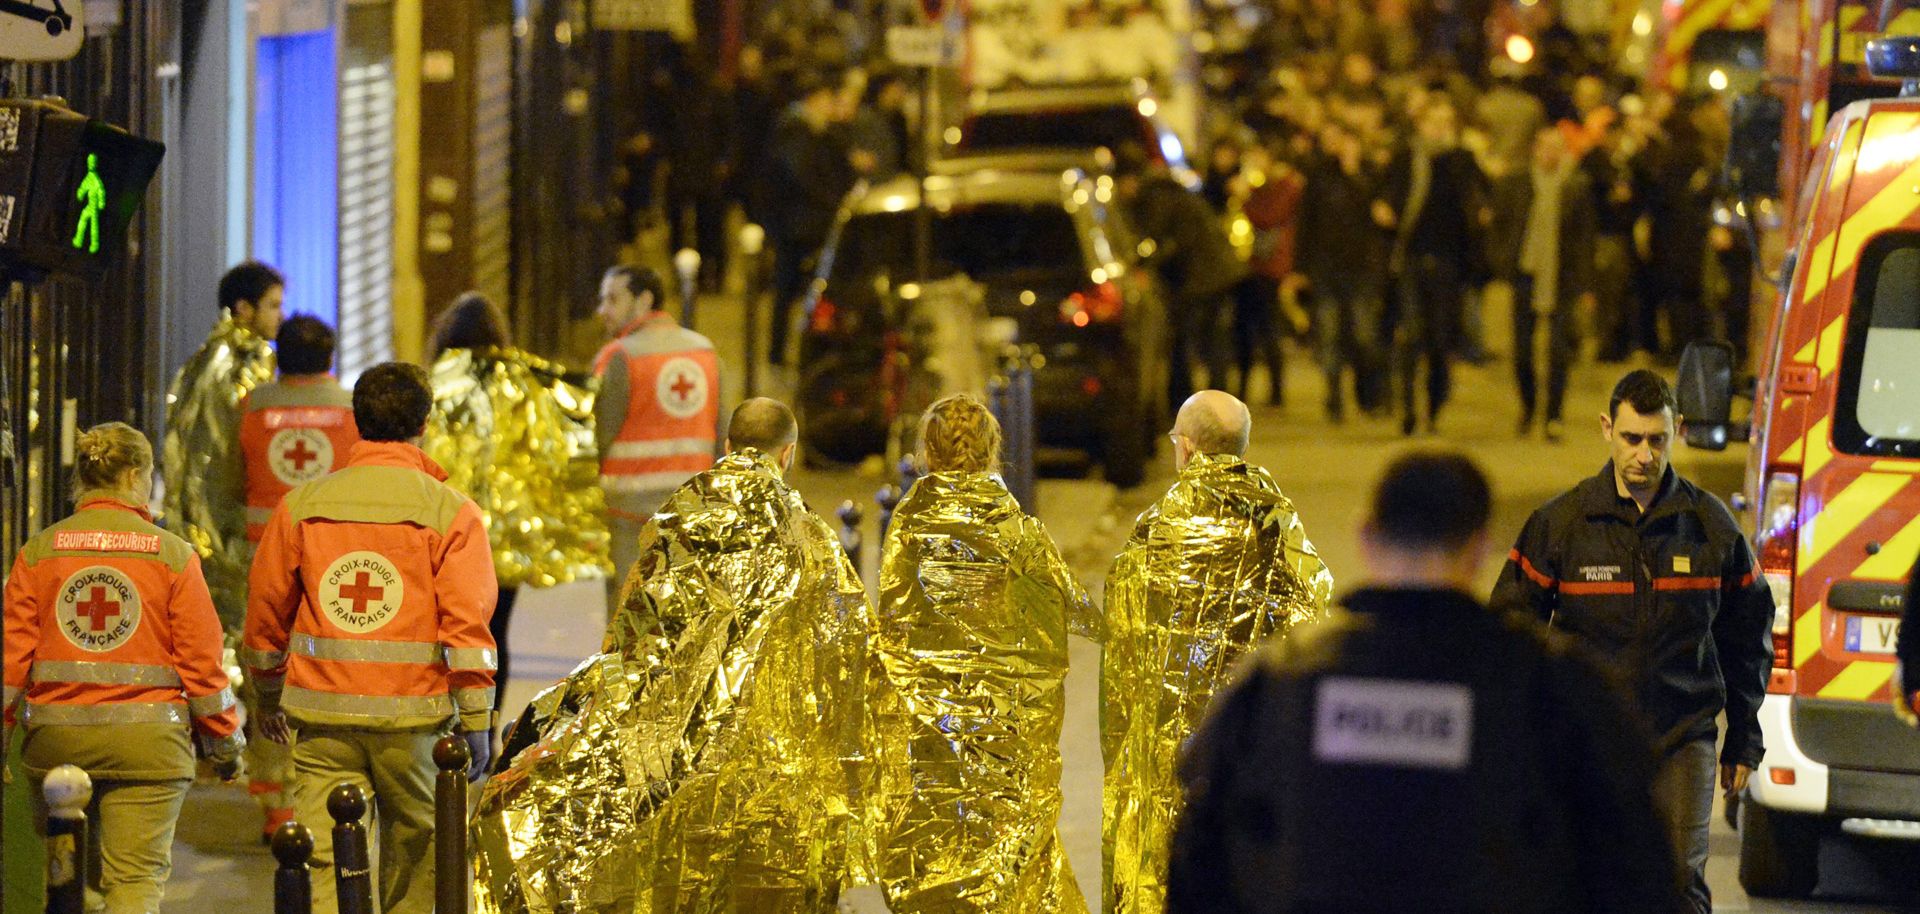 What We Know About the Paris Attacks